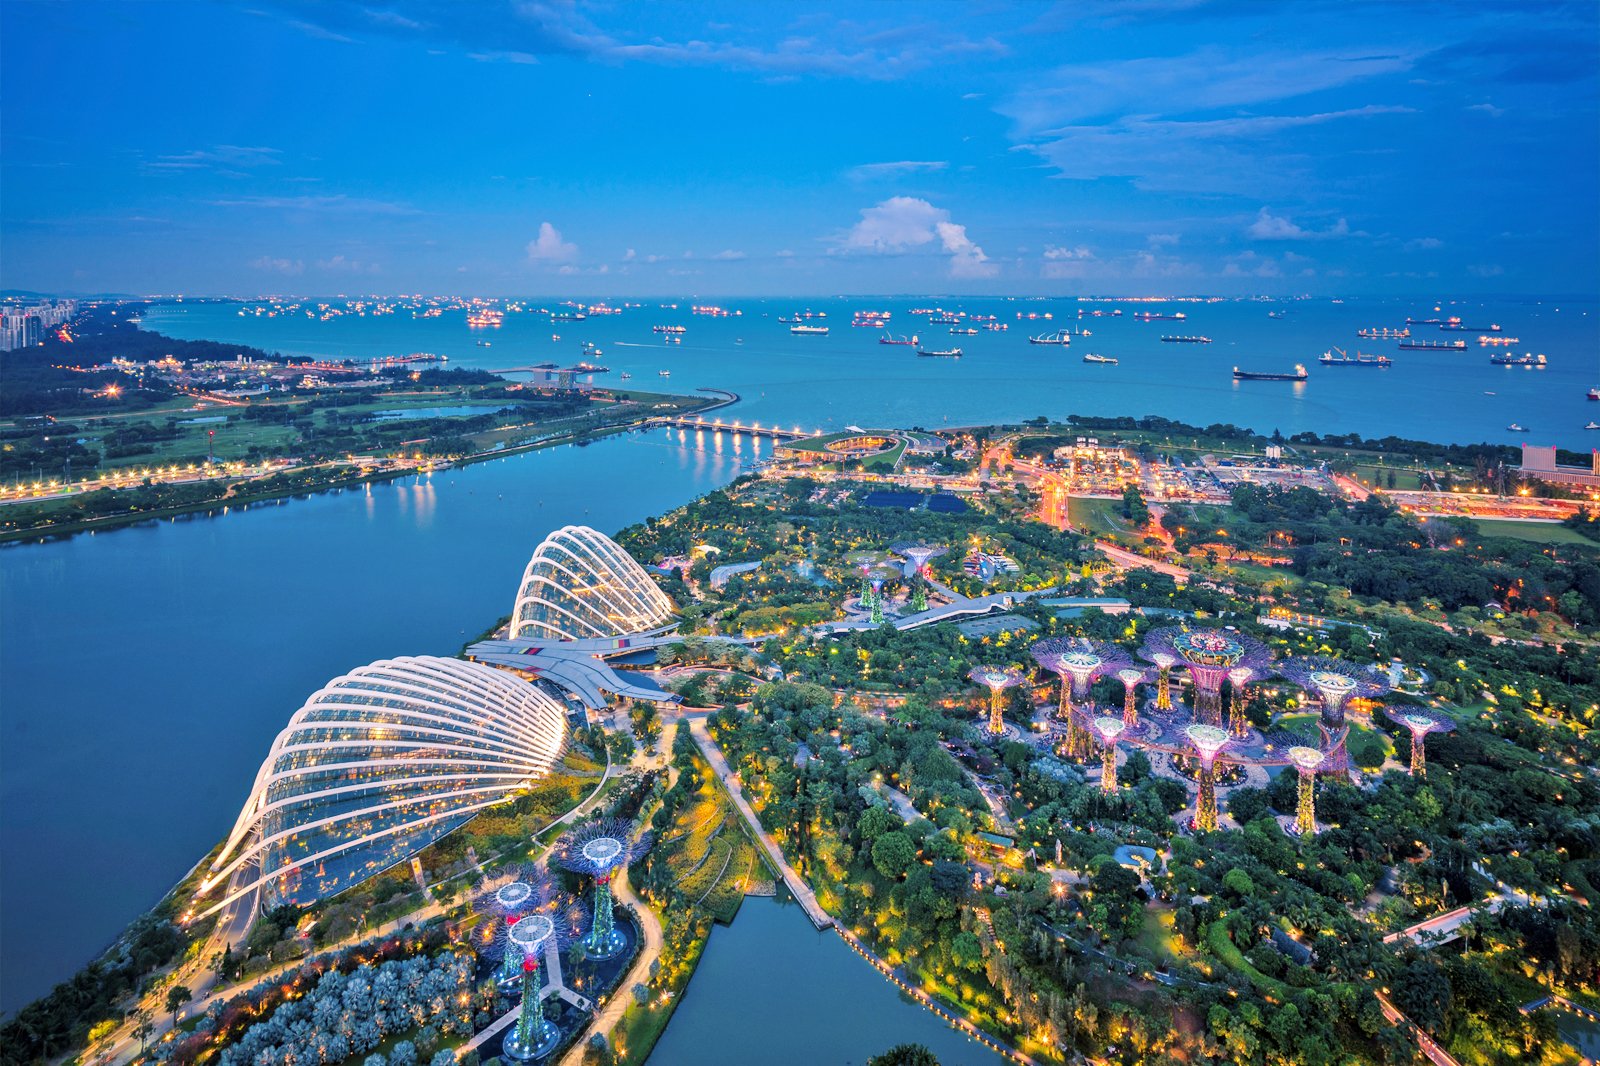 Urban Treasures - 11 TEL3 stations from Stevens to Gardens by the Bay to open November 13 with free rides